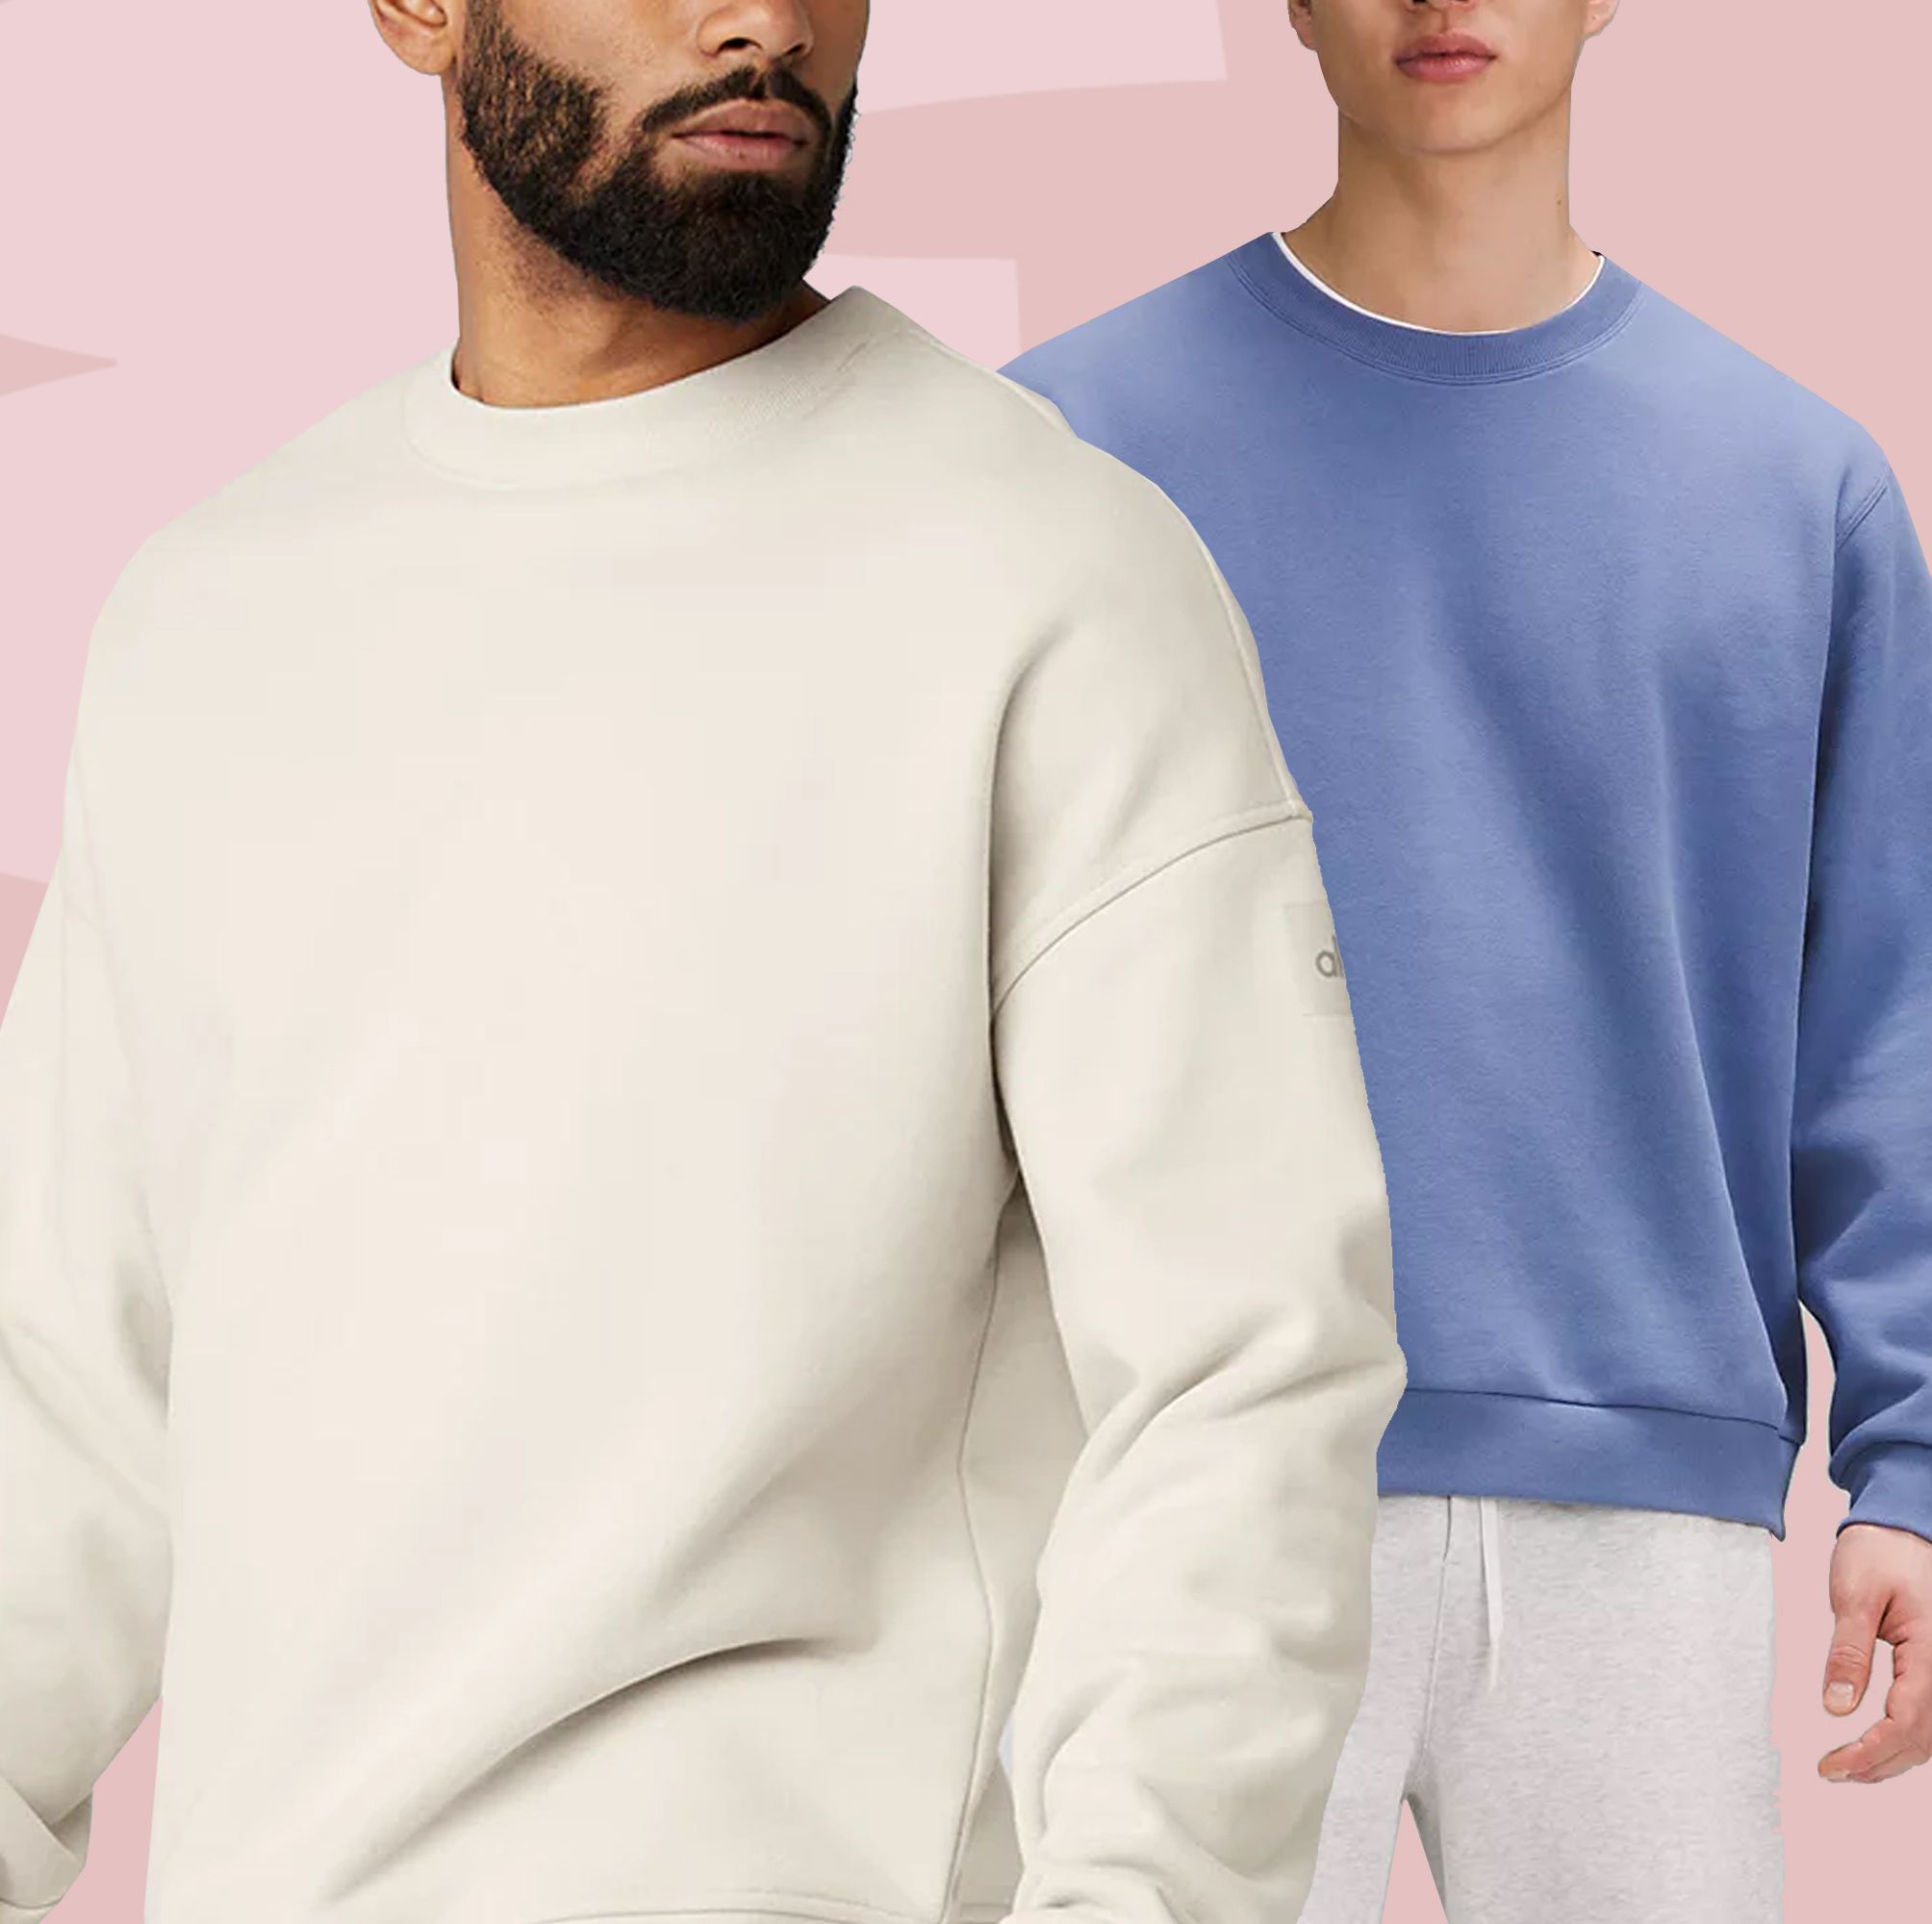 The Best Crewneck Sweatshirts to Dress Up, Down, and Everywhere in Between